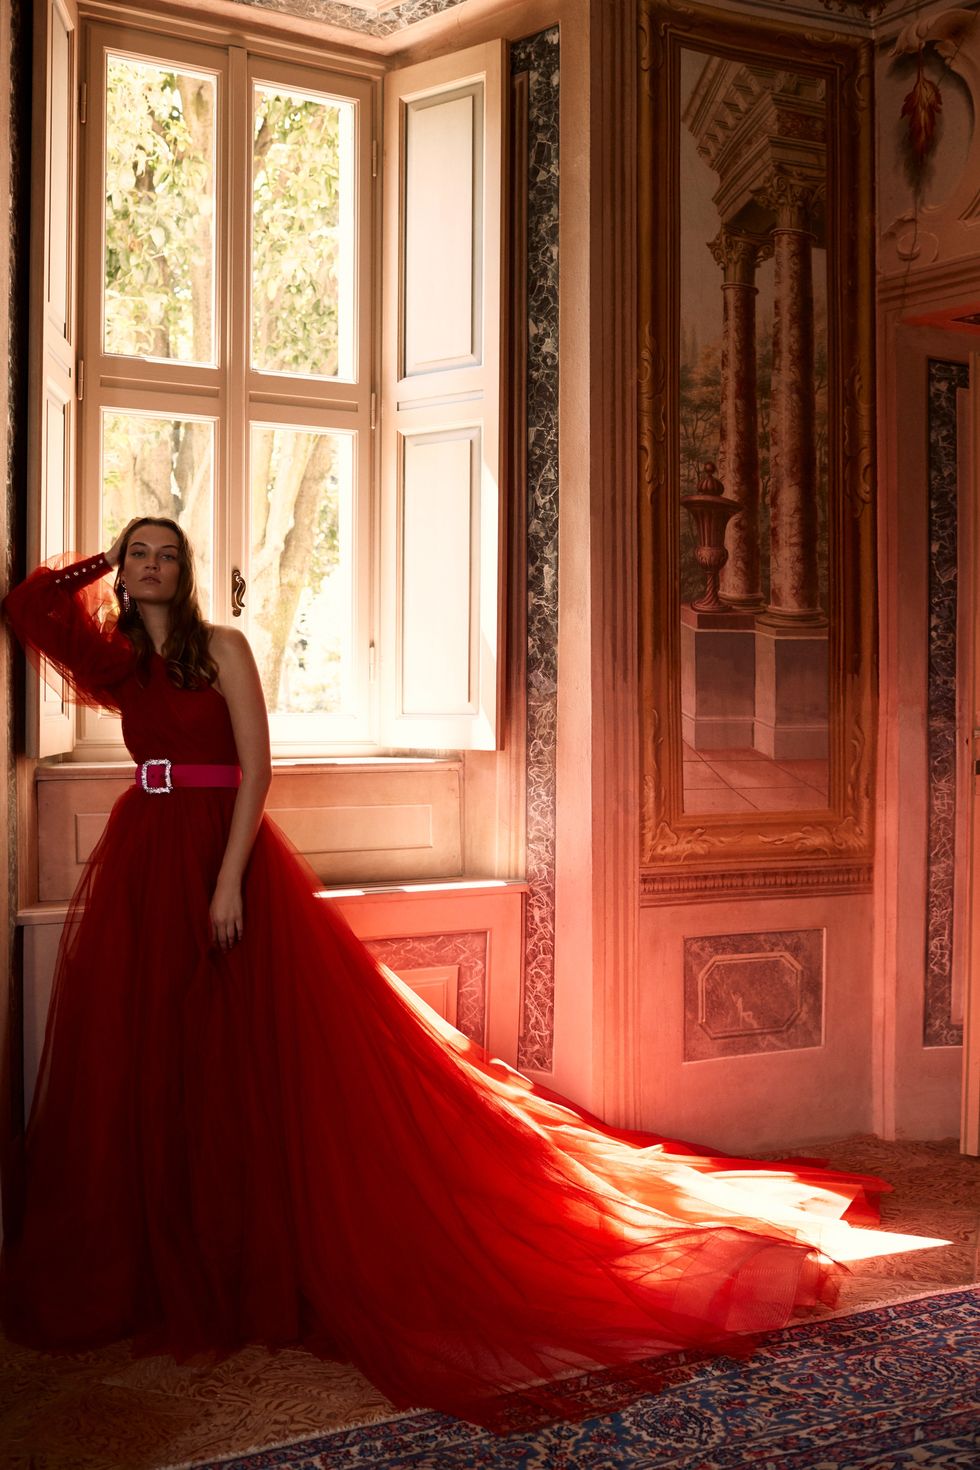 Gown, Dress, Red, Clothing, Photograph, Wedding dress, Bridal clothing, Beauty, Bride, Orange, 